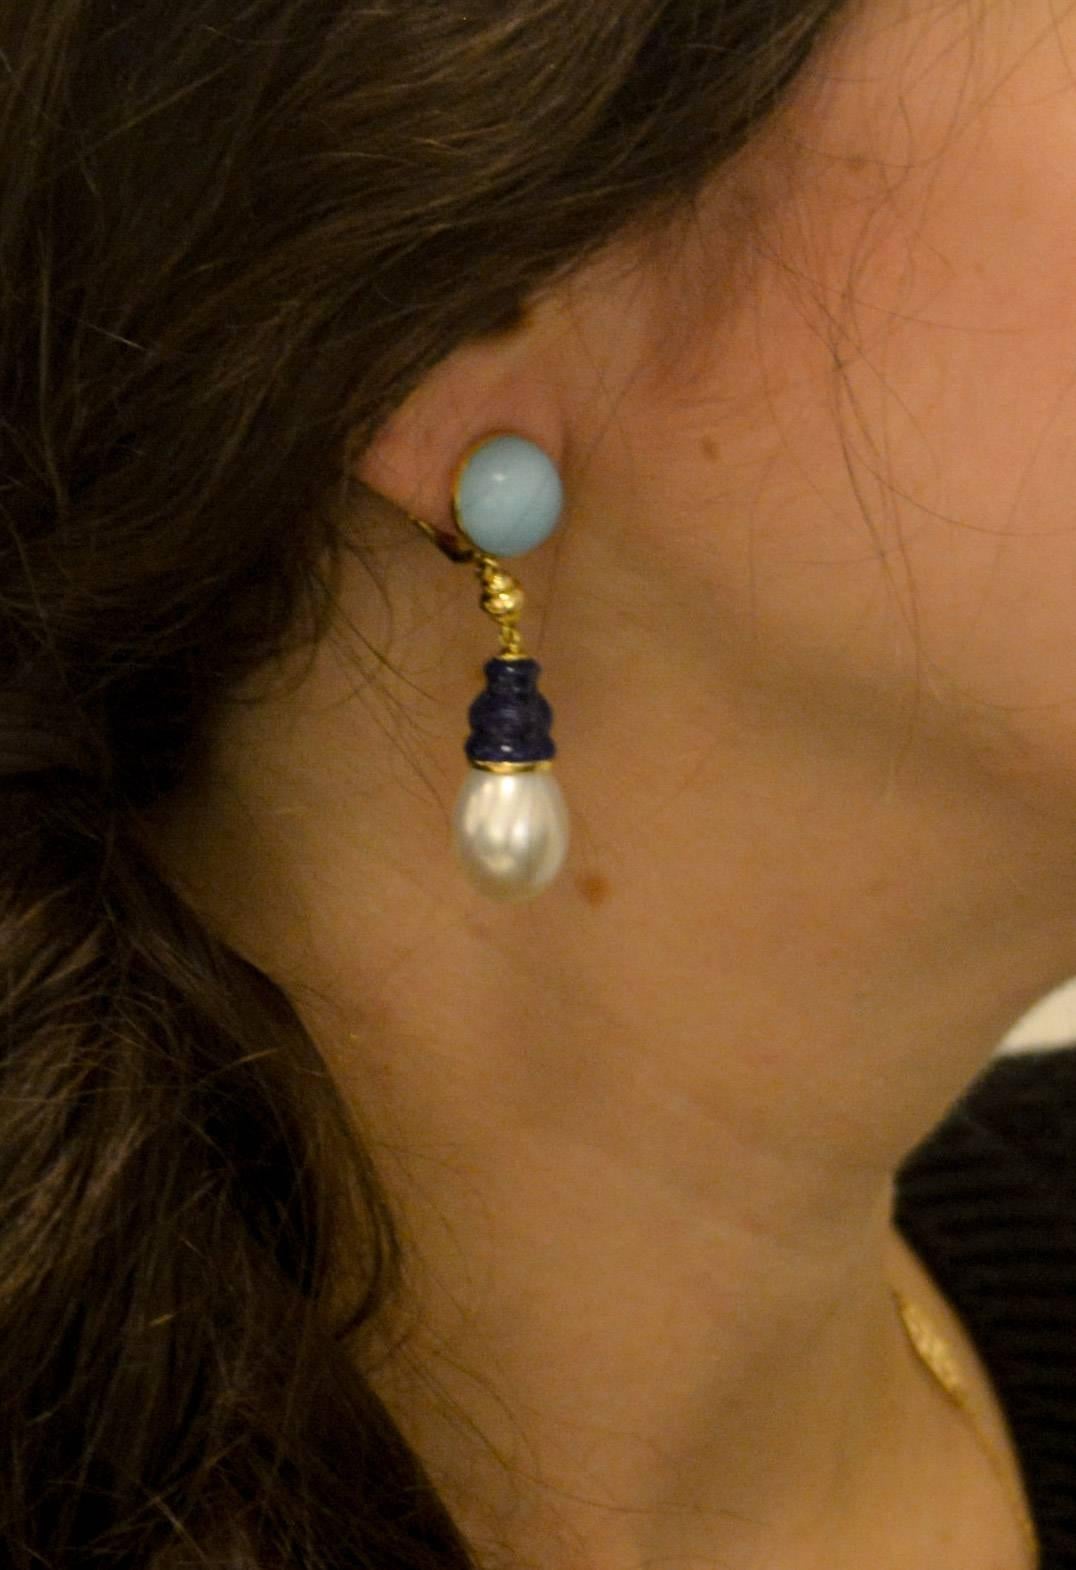 Dazzling pearls complimented by sky blue turquoise and Lapis Lazuli earrings created by Seaman Schepps. Two striking hues of blue in these custom Canton earrings designed with an amazing round cabochon cut bezel set turquoise top. Suspended from the